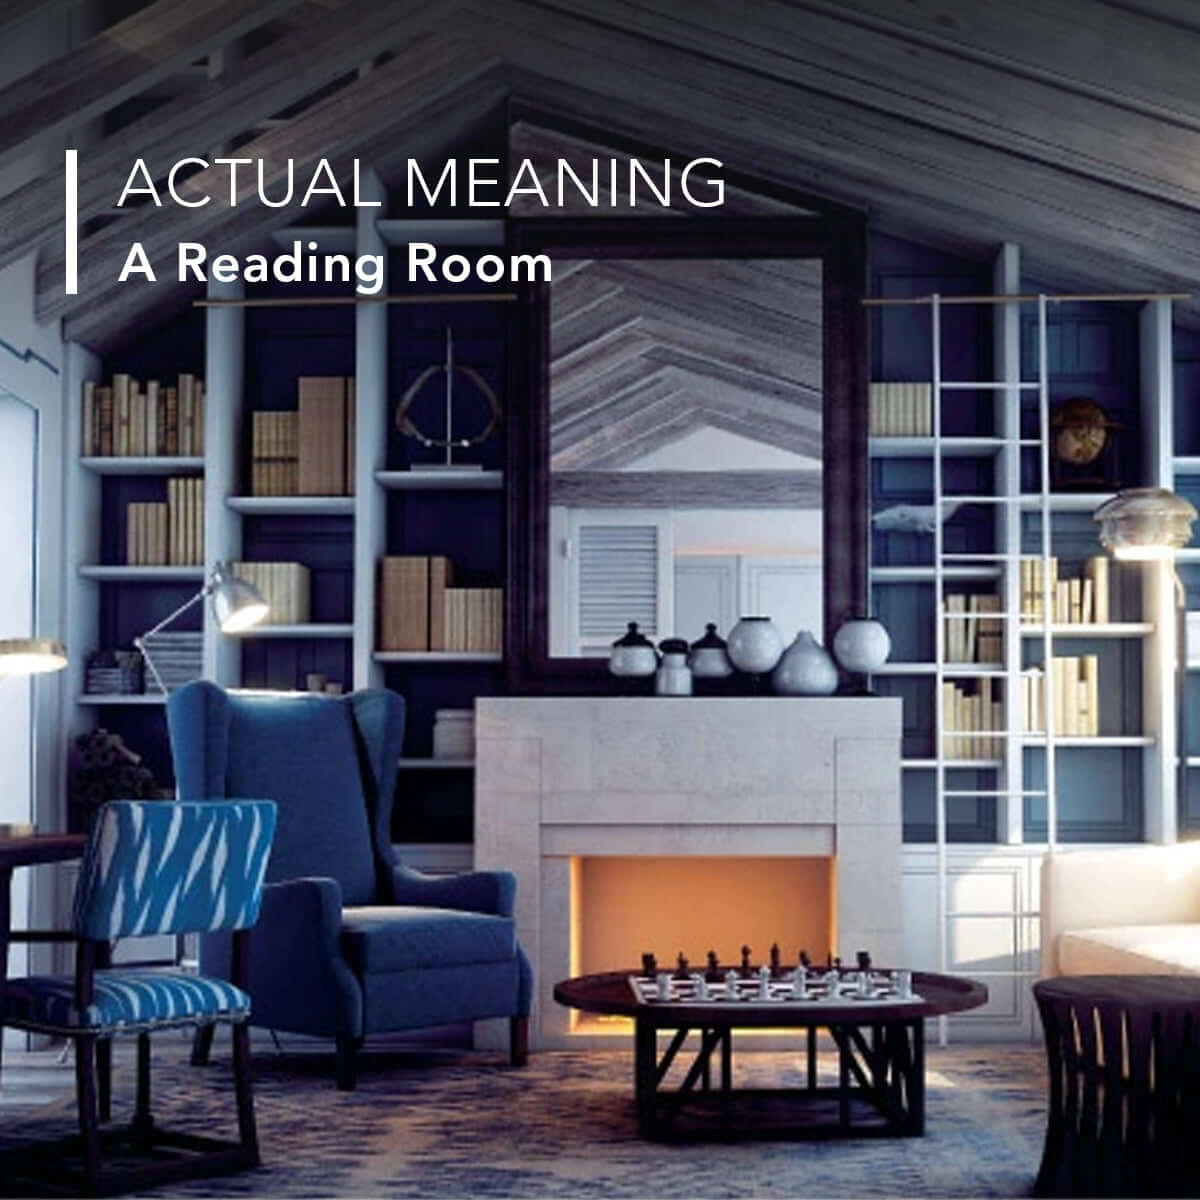 Actual Meaning : A Reading Room